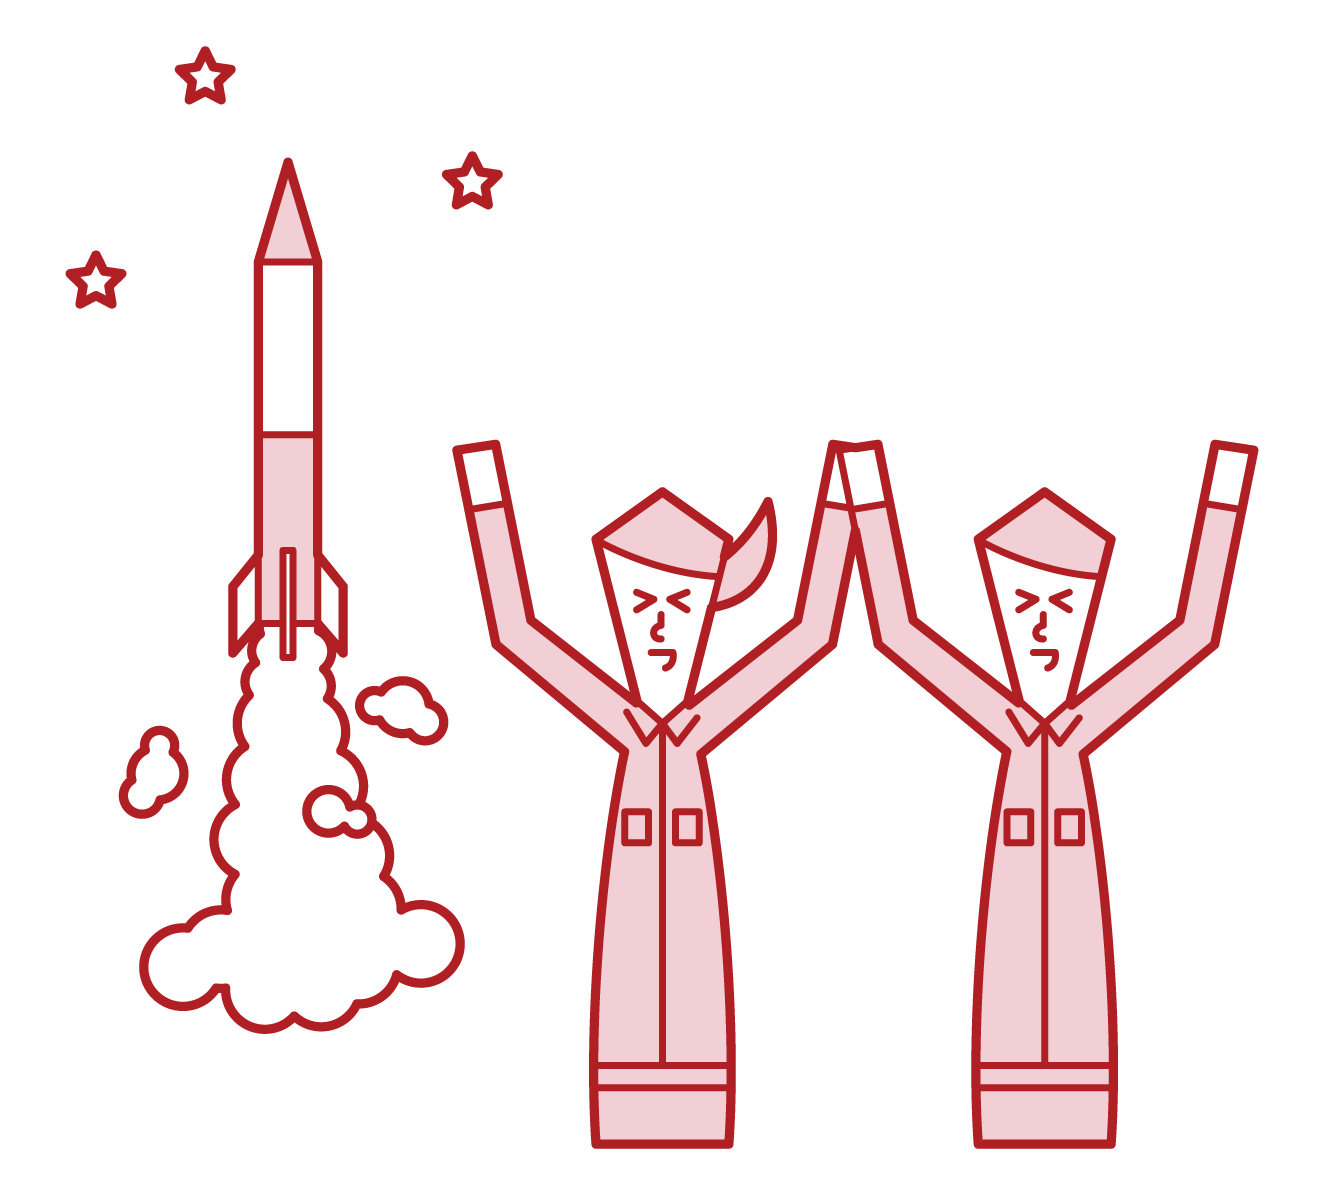 Illustrations of people who successfully launched the rocket